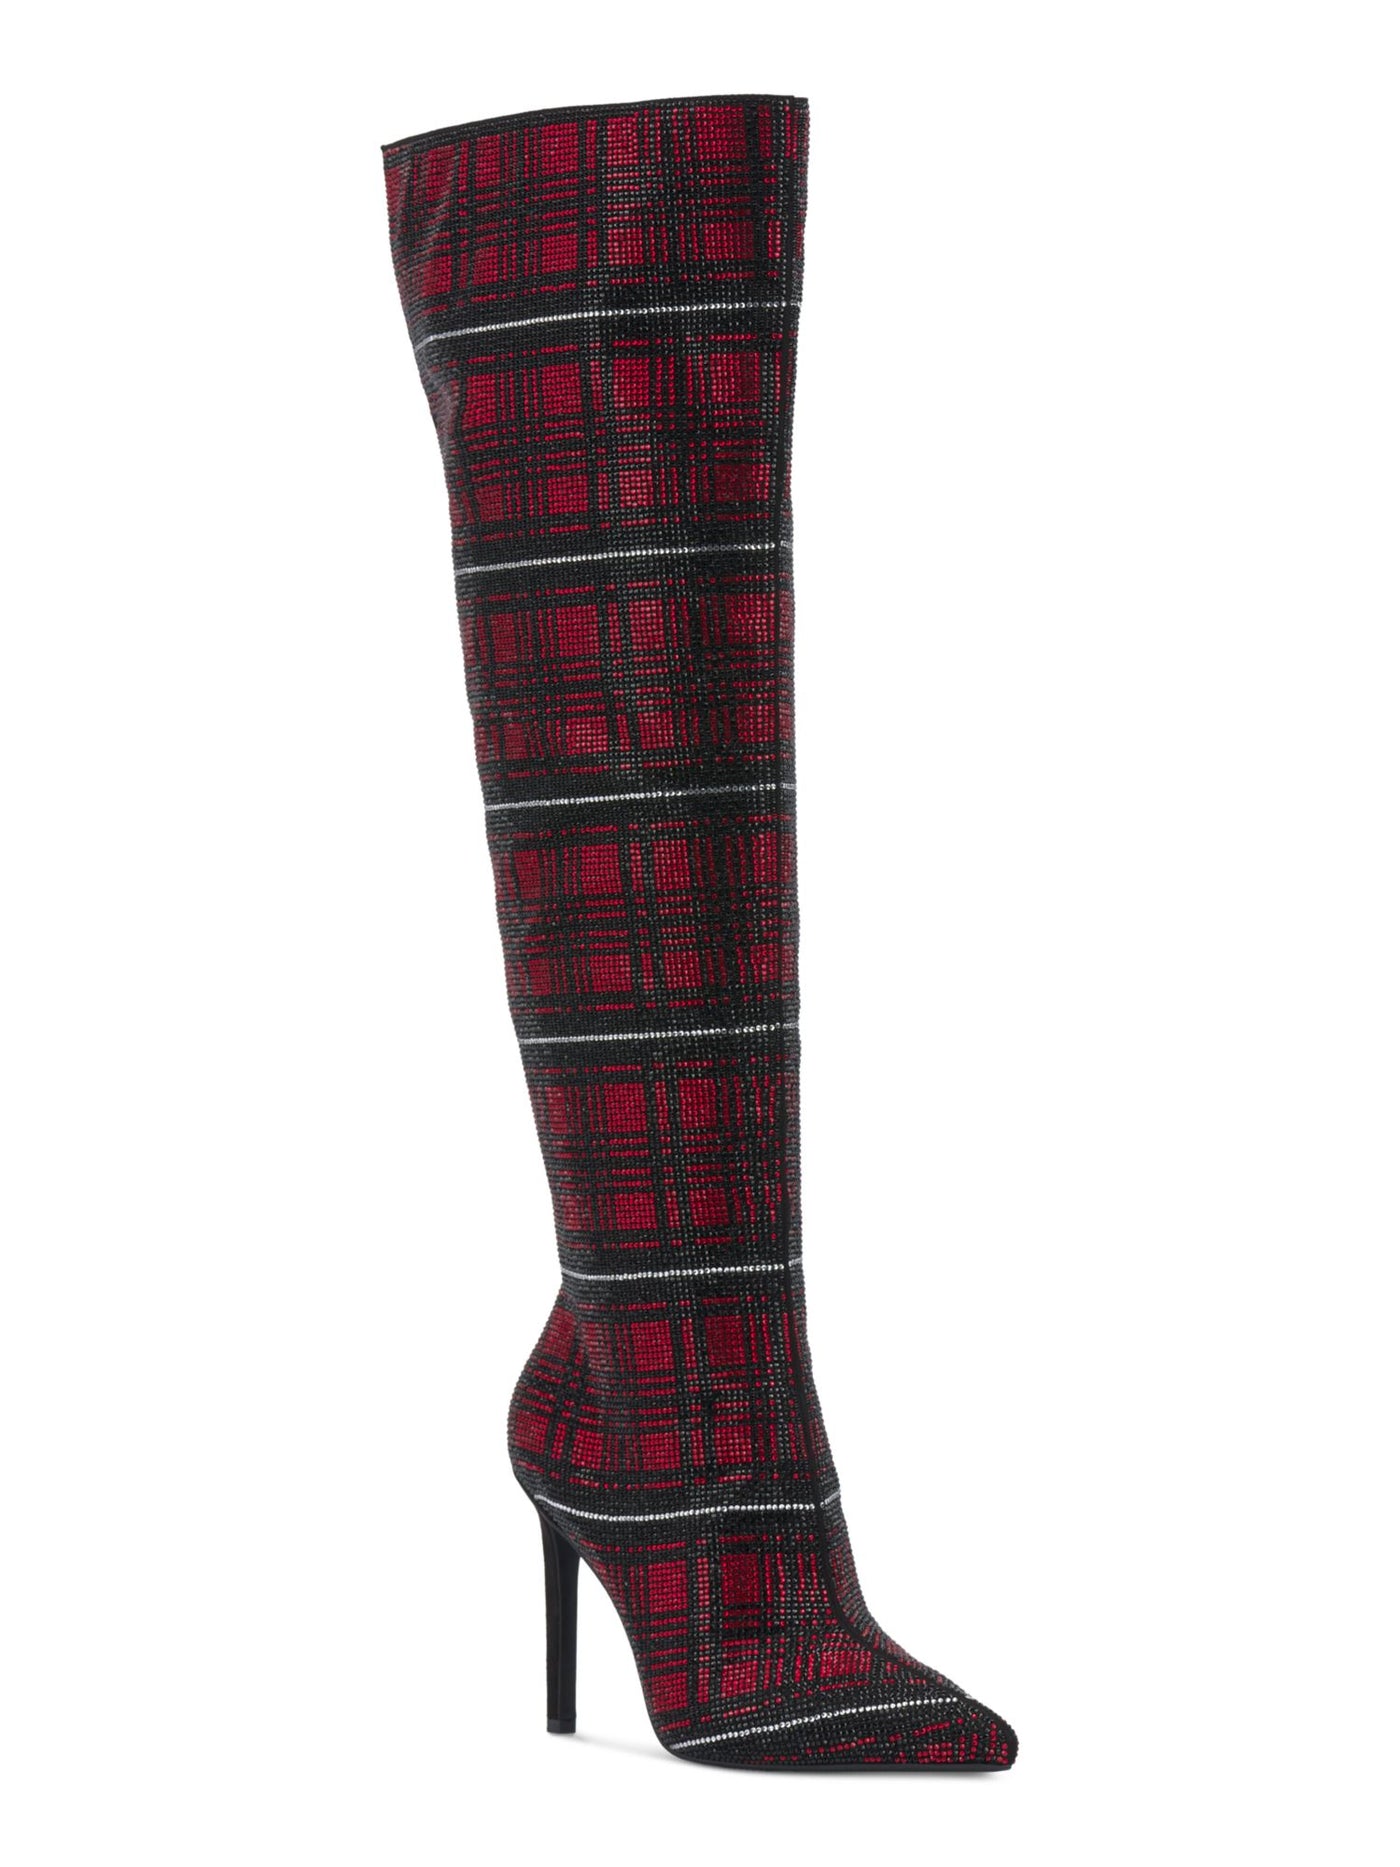 INC Womens Red Plaid Vented Back Padded Rhinestone Goring Saveria Pointed Toe Stiletto Zip-Up Dress Boots 6 M